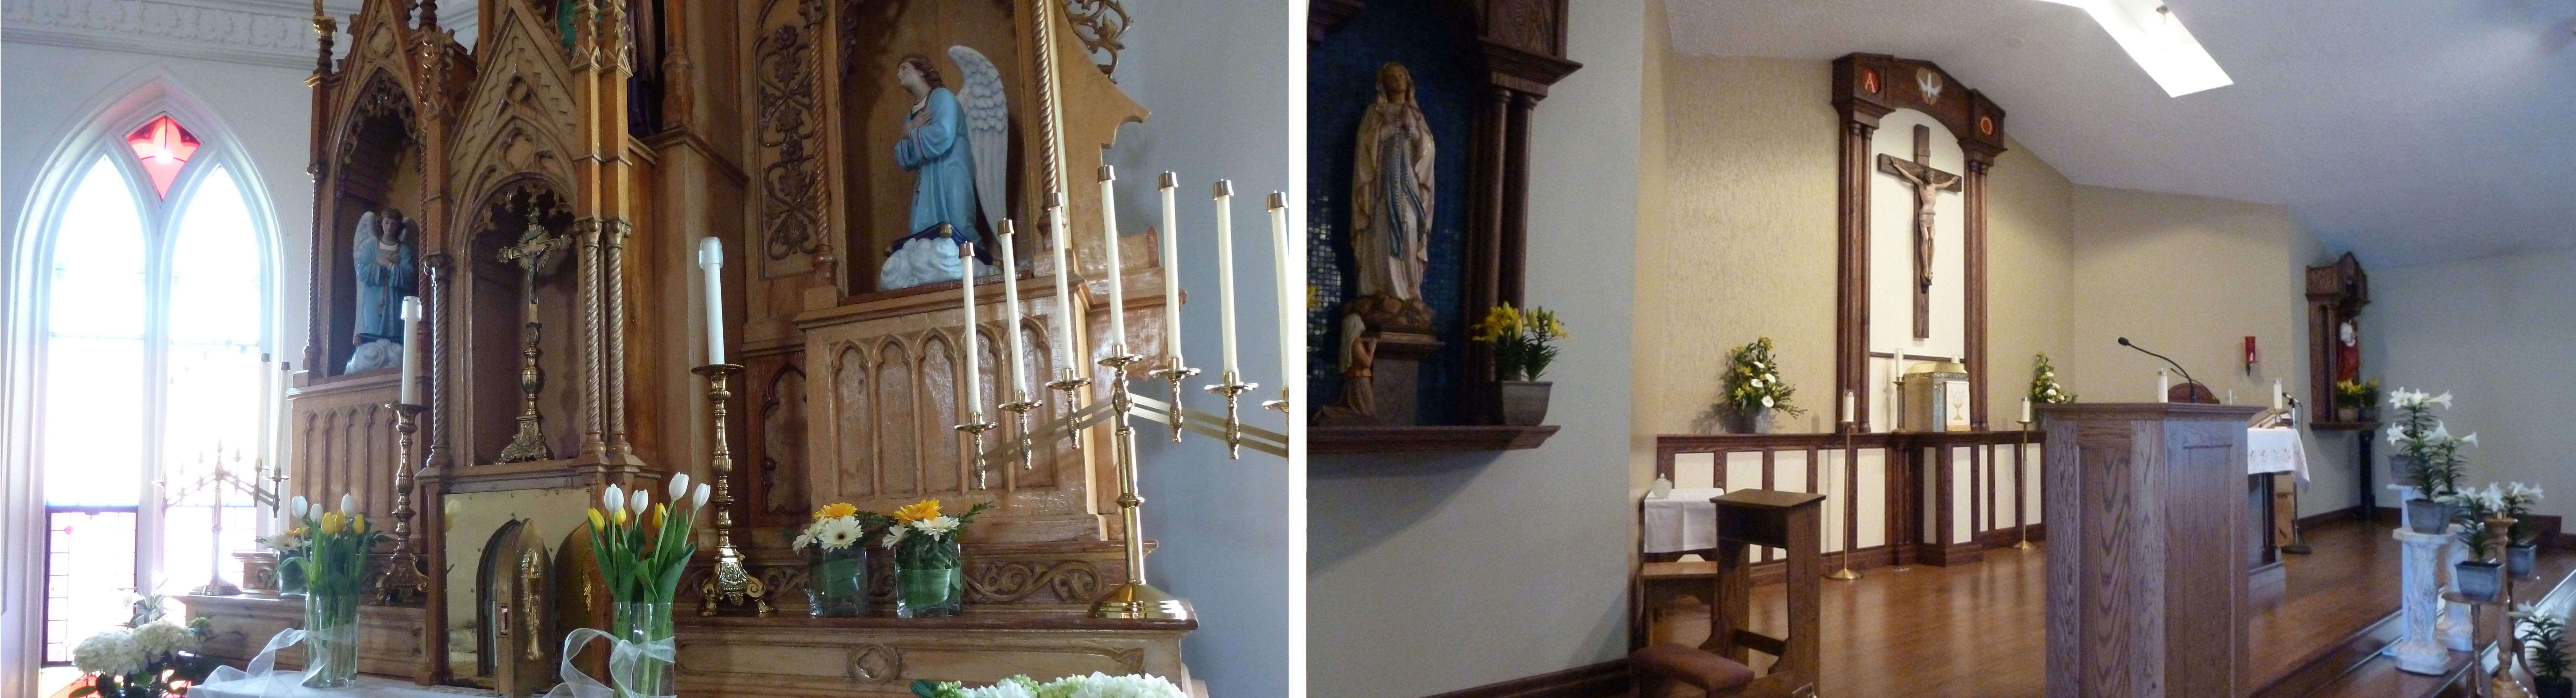 St. Patrick's and Our Lady of Lourdes Altars